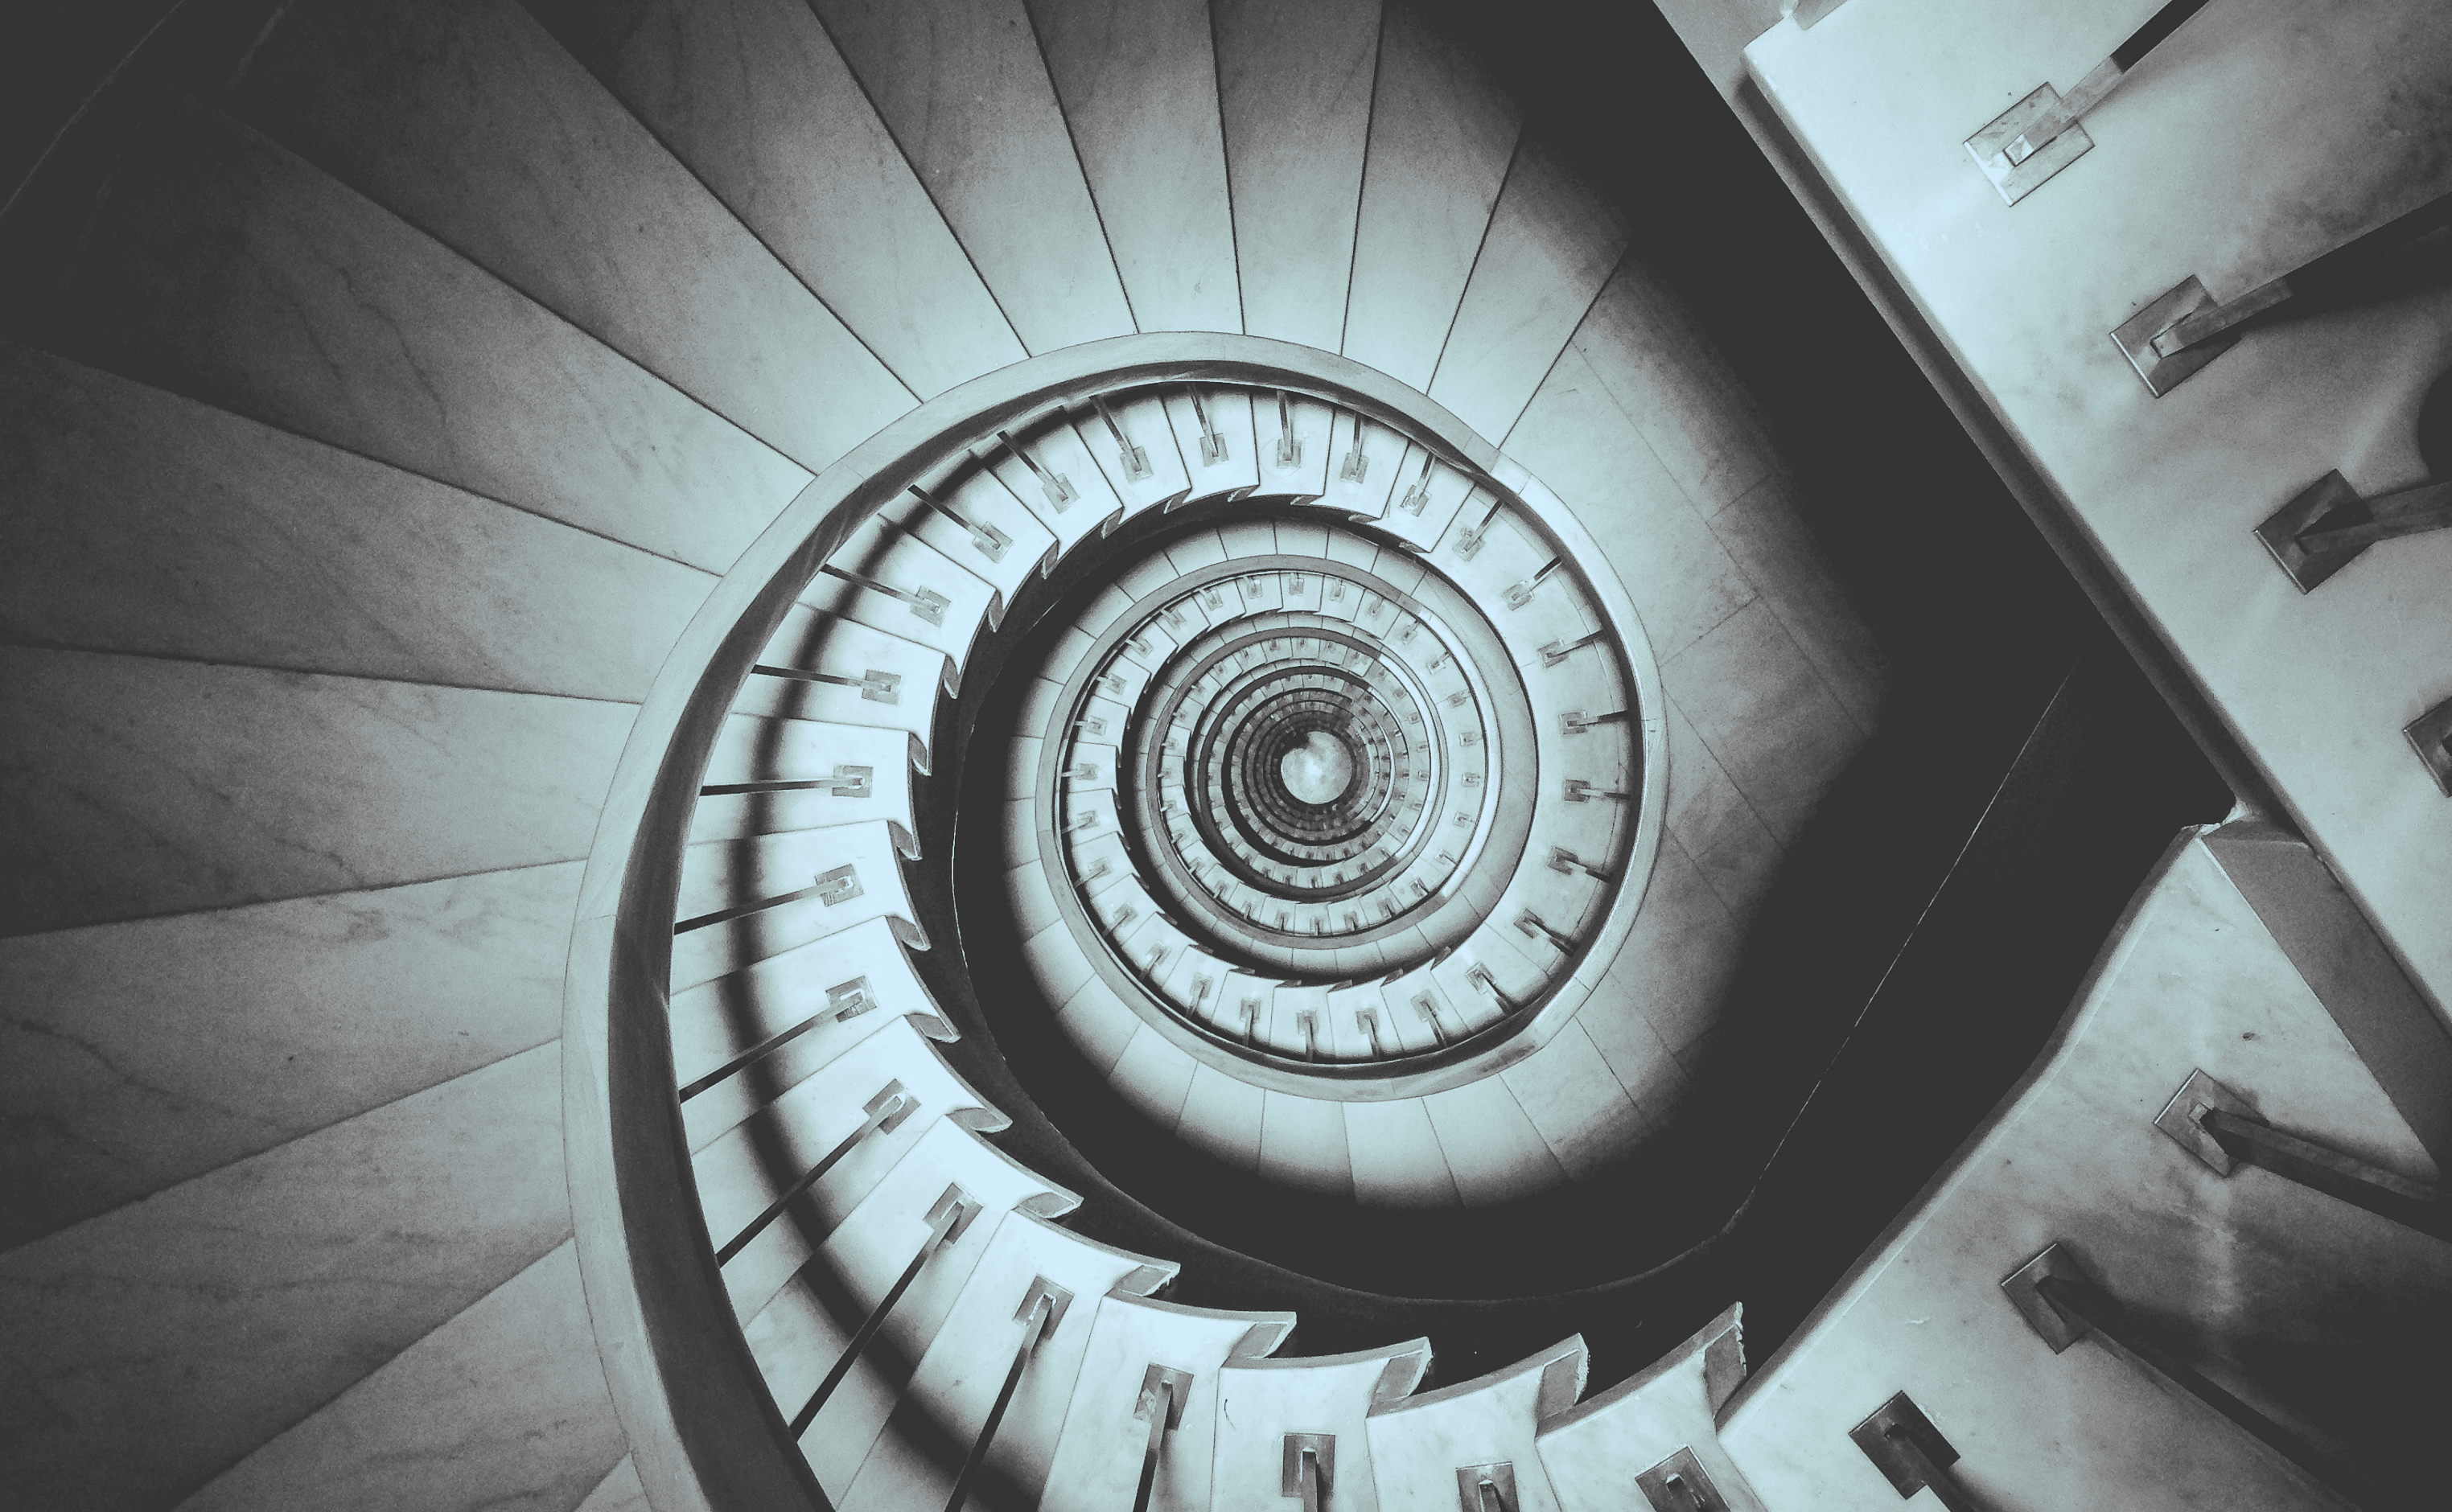 Staircase top view that appears like a swirl with a washed out blue hue overlay